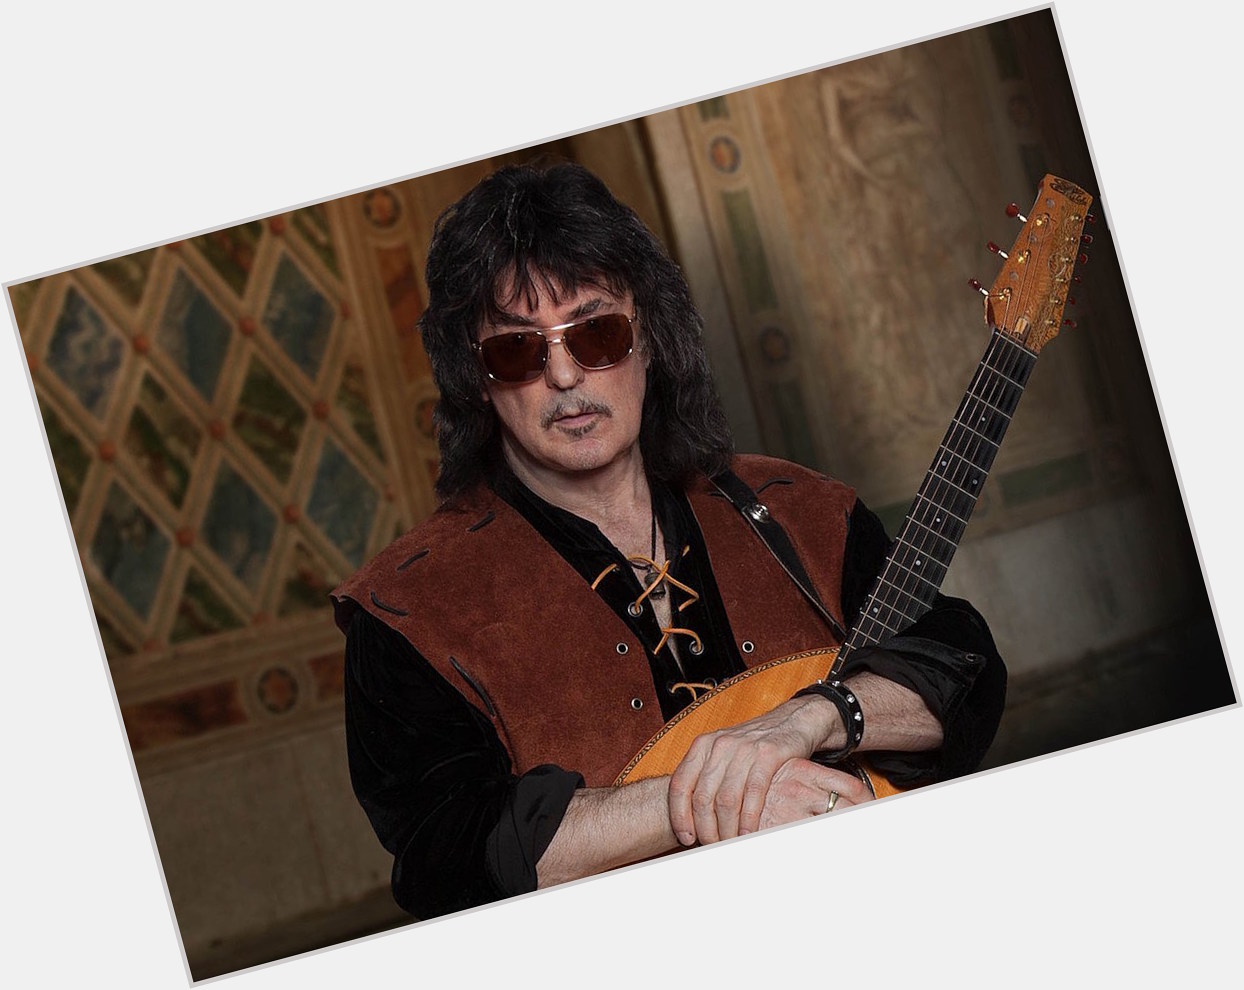 Wishing the one and only Ritchie Blackmore a very Happy Birthday today   